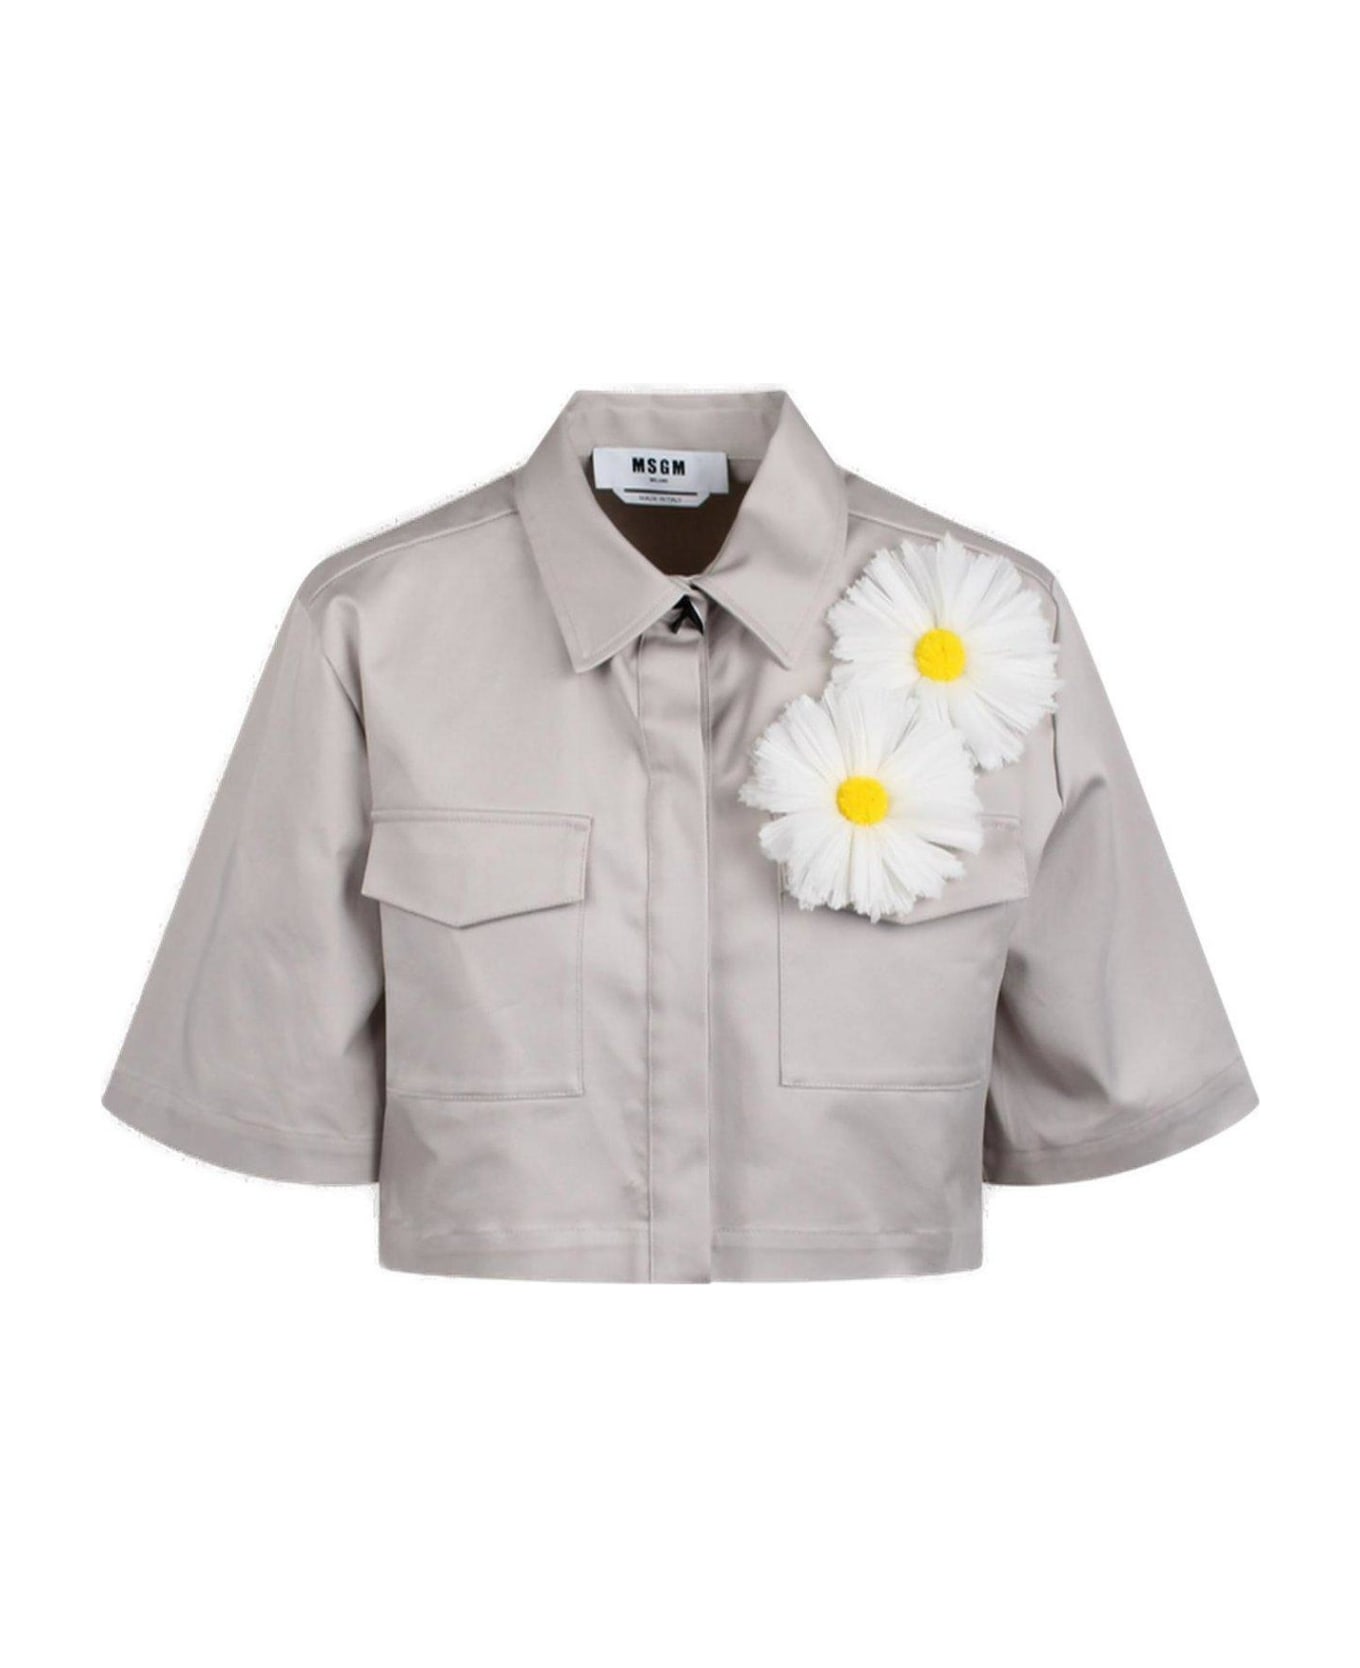 MSGM Floral Detailed Cropped Shirt - Grey